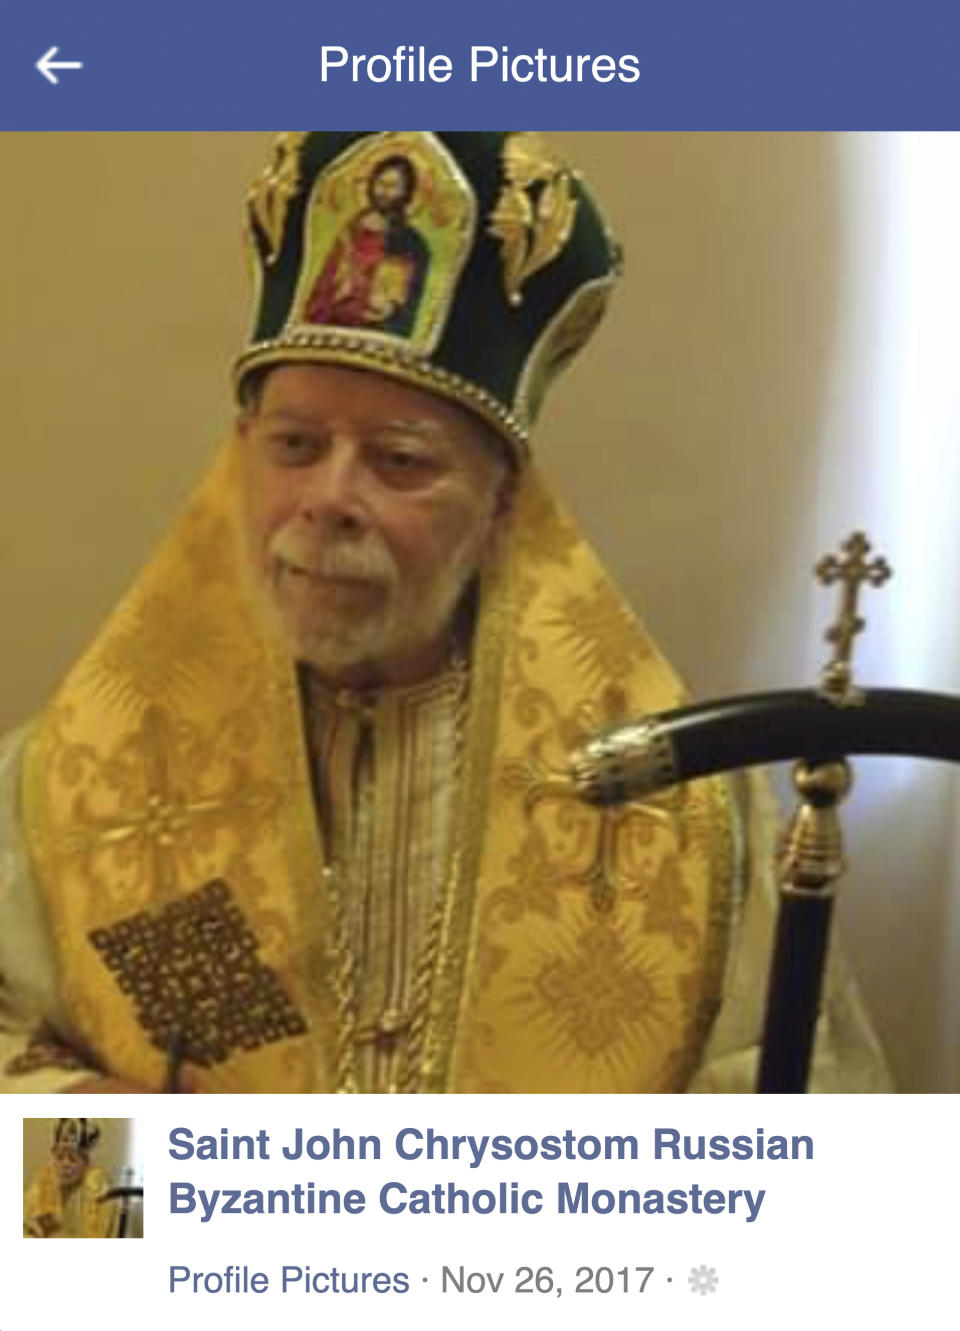 This undated photo posted to Facebook in 2017 shows Jerome Bernard Robben. Three decades earlier, Robben, a St. Louis Catholic high school teacher; and James A. Funke, a priest, went to prison for sexually abusing male students together. In 2017, this social media account identified Robben _ wearing a crown and gold vestments _ as the leader of a Russian Byzantine order raising money to build a monastery in Nevada. (AP Photo)